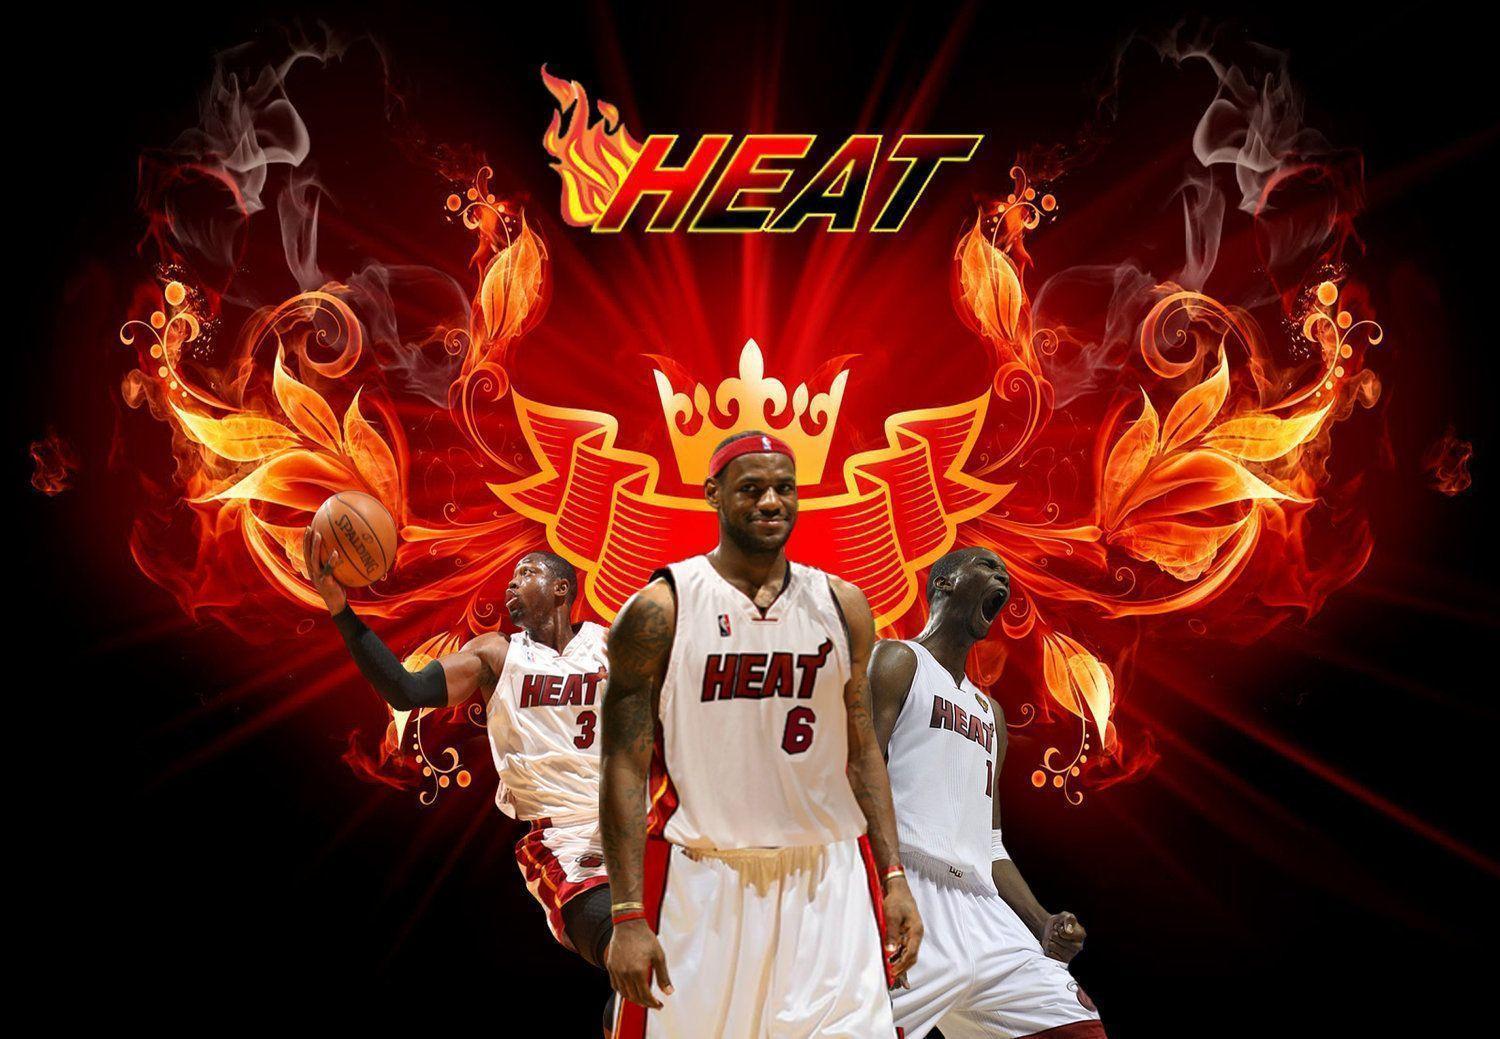 Miami Heat Wallpapers Hd Wallpaper Cave Download miami heat logo in yellow background hd miami heat wallpaper from the above hd widescreen 4k 5k 8k ultra hd. miami heat wallpapers hd wallpaper cave